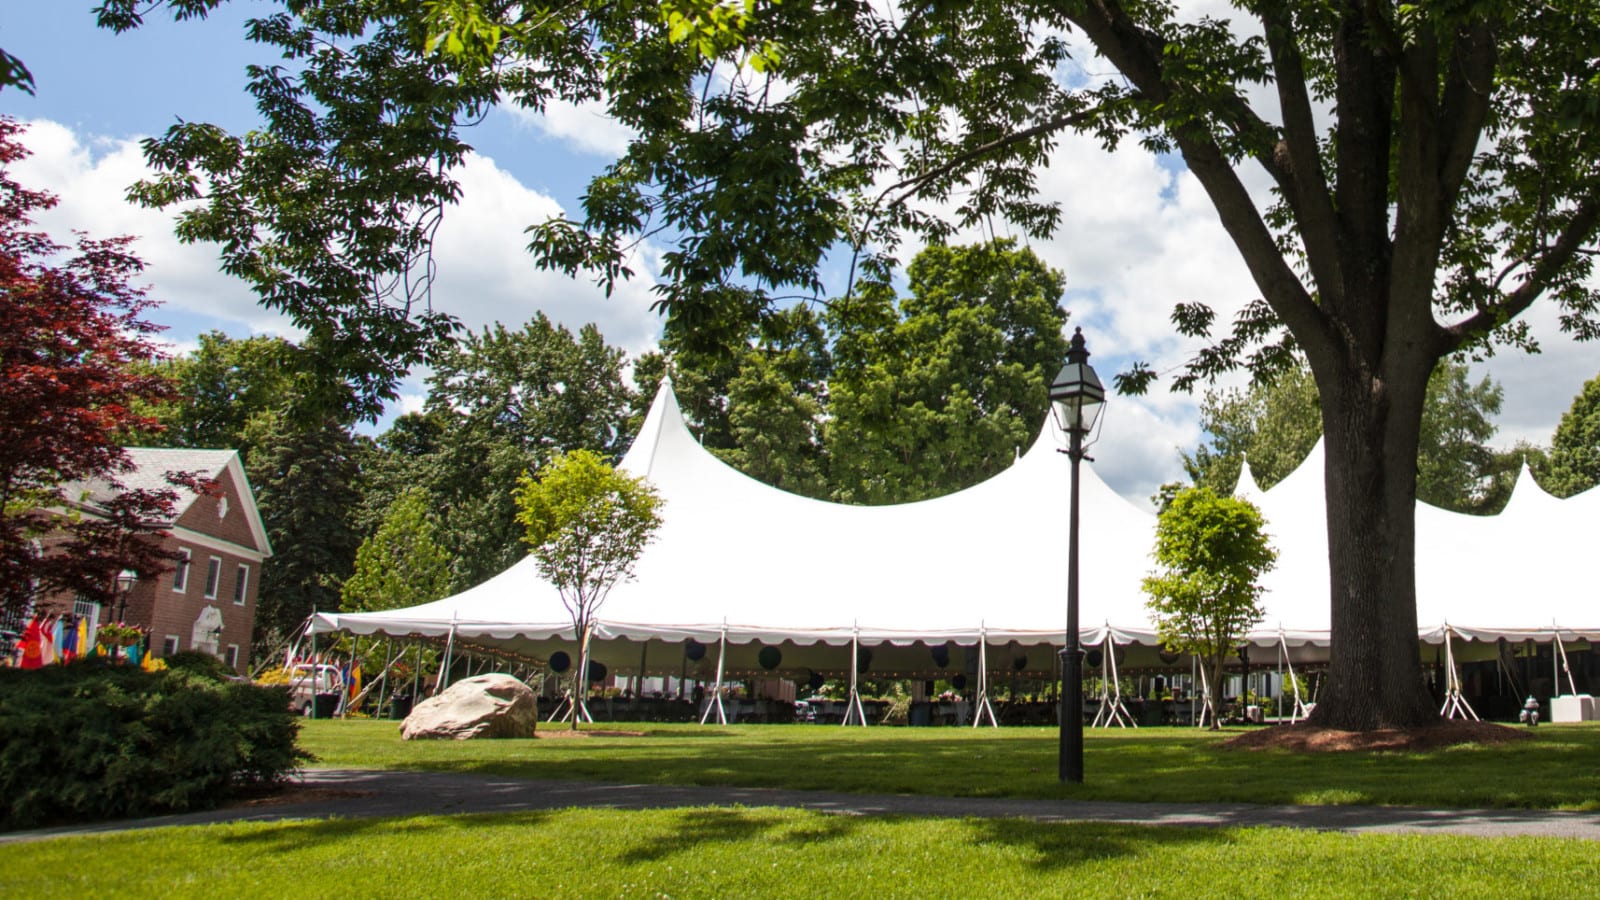 Large white tent and tree on lawn